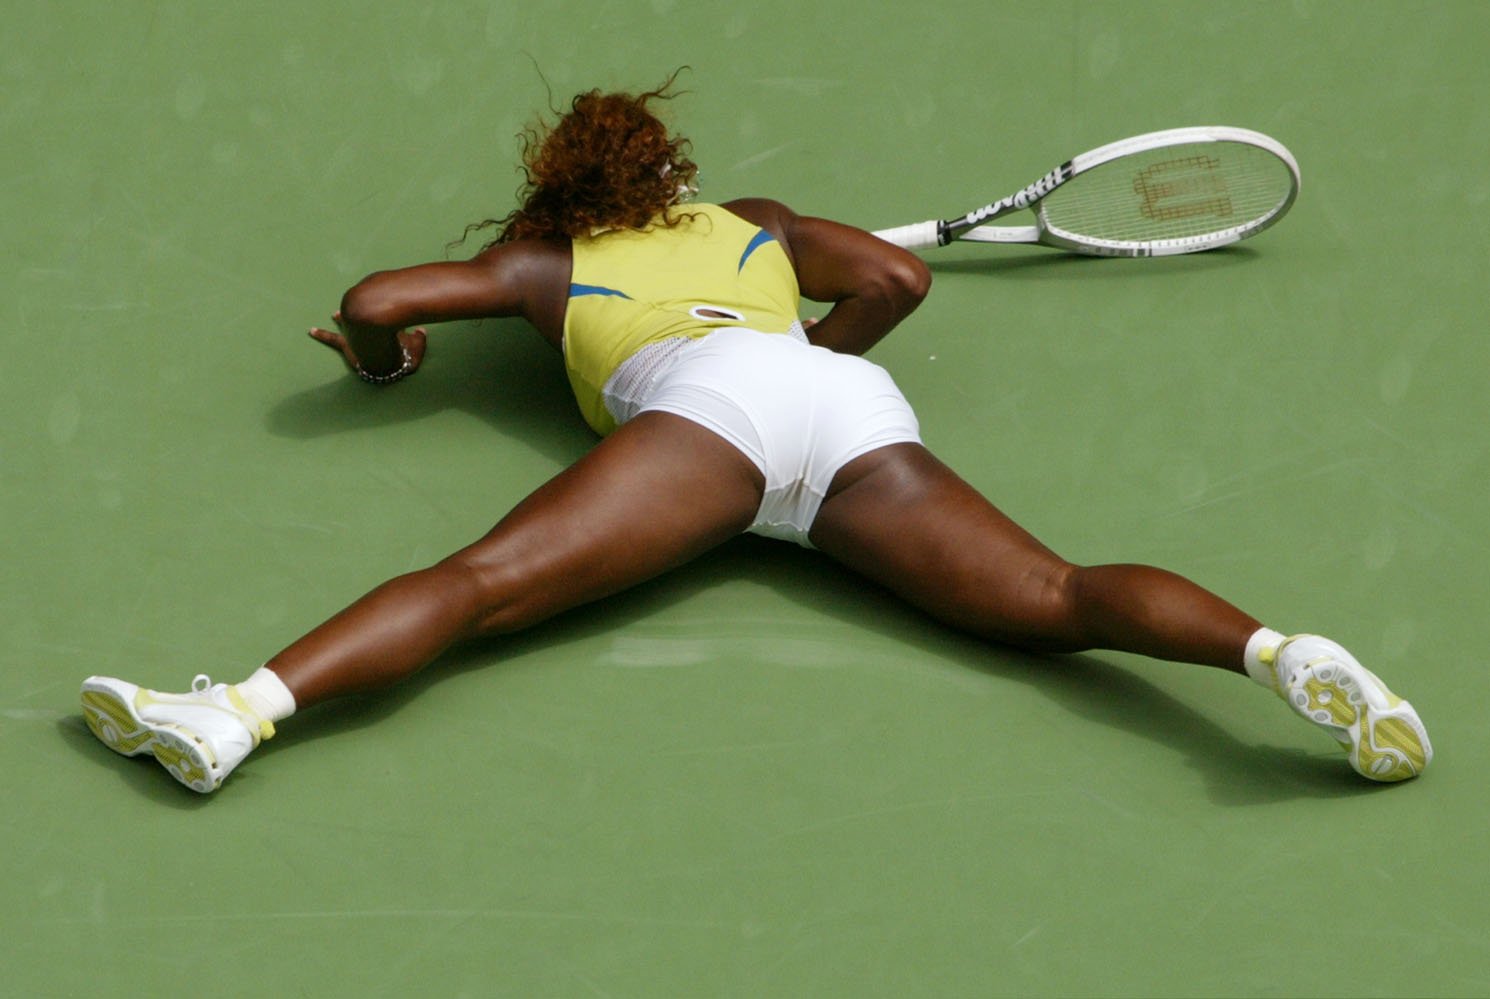 asa fredriksson add serena williams pussy pictures photo